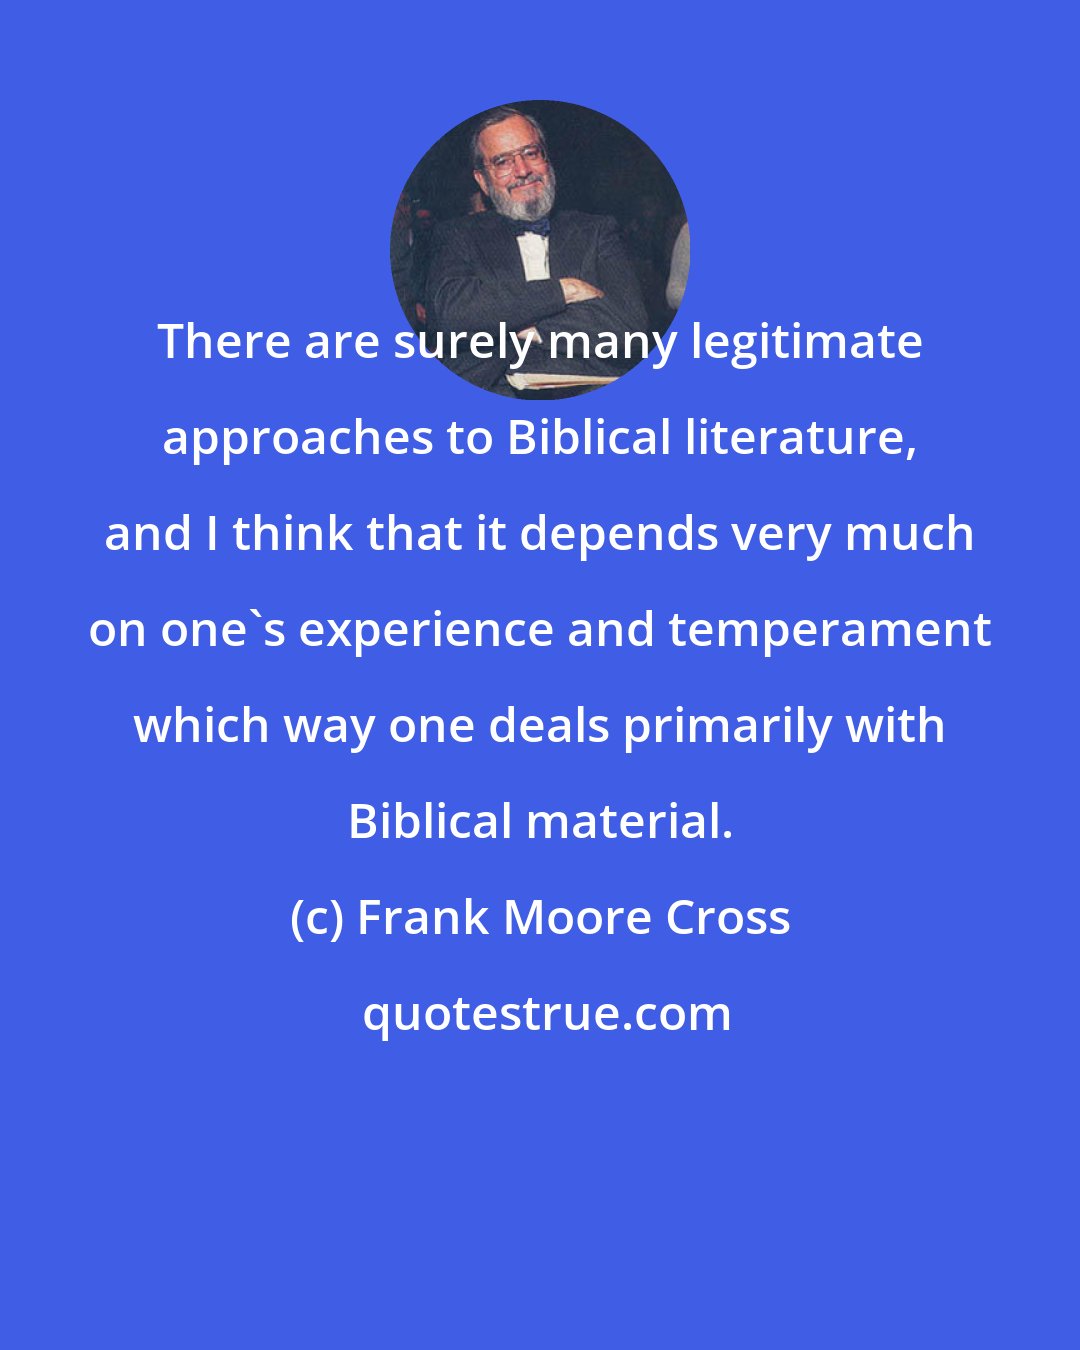 Frank Moore Cross: There are surely many legitimate approaches to Biblical literature, and I think that it depends very much on one's experience and temperament which way one deals primarily with Biblical material.